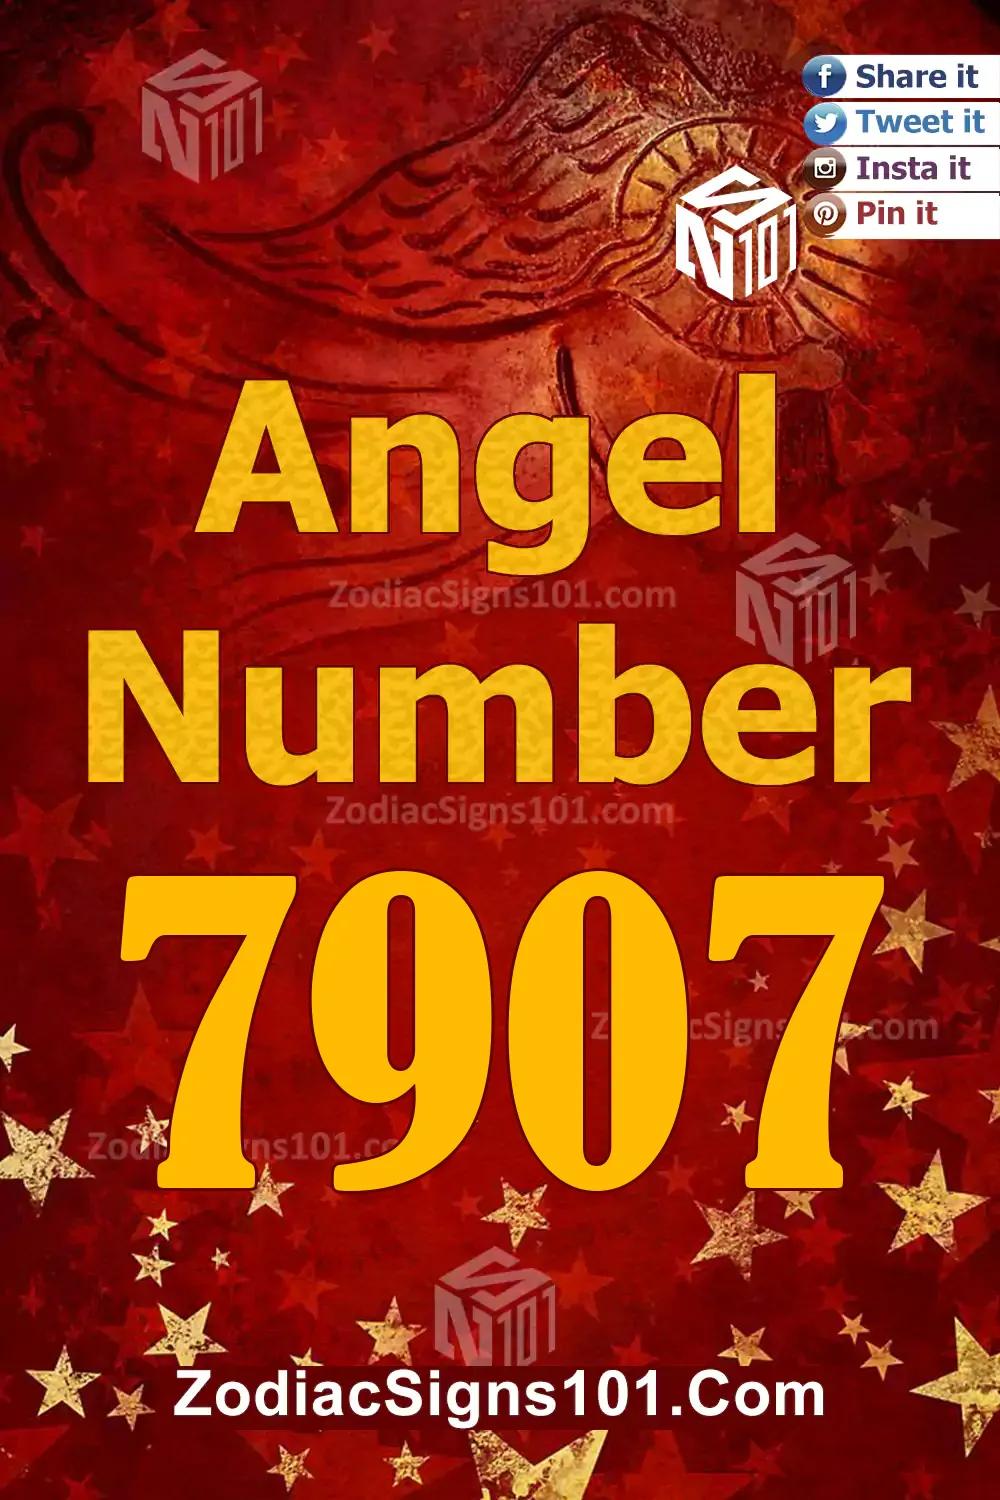 7907 Angel Number Meaning